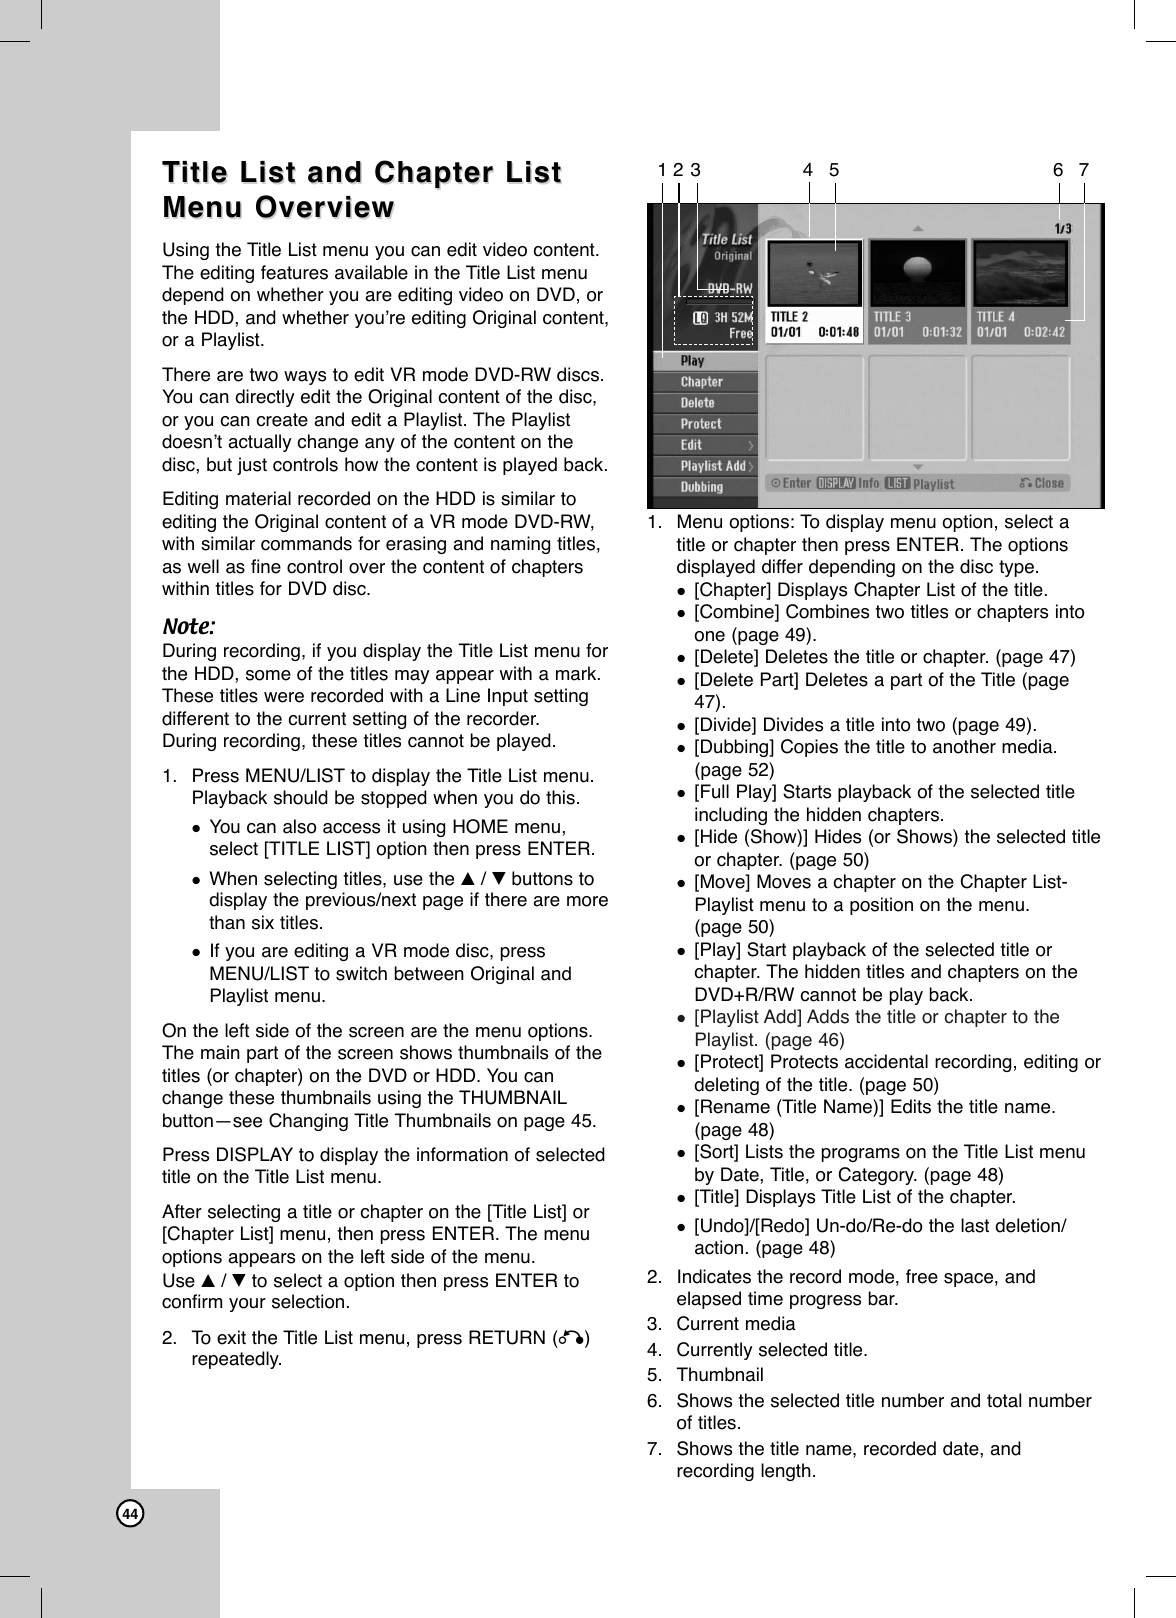 44TTitle List and Chapter Listitle List and Chapter ListMenu Overview Menu Overview Using the Title List menu you can edit video content.The editing features available in the Title List menudepend on whether you are editing video on DVD, orthe HDD, and whether you’re editing Original content,or a Playlist.There are two ways to edit VR mode DVD-RW discs.You can directly edit the Original content of the disc,or you can create and edit a Playlist. The Playlistdoesn’t actually change any of the content on thedisc, but just controls how the content is played back.Editing material recorded on the HDD is similar toediting the Original content of a VR mode DVD-RW,with similar commands for erasing and naming titles,as well as fine control over the content of chapterswithin titles for DVD disc.Note:During recording, if you display the Title List menu forthe HDD, some of the titles may appear with a mark.These titles were recorded with a Line Input settingdifferent to the current setting of the recorder.During recording, these titles cannot be played.1. Press MENU/LIST to display the Title List menu.Playback should be stopped when you do this.You can also access it using HOME menu,select [TITLE LIST] option then press ENTER.When selecting titles, use the v/ Vbuttons todisplay the previous/next page if there are morethan six titles.If you are editing a VR mode disc, pressMENU/LIST to switch between Original andPlaylist menu.On the left side of the screen are the menu options.The main part of the screen shows thumbnails of thetitles (or chapter) on the DVD or HDD. You canchange these thumbnails using the THUMBNAILbutton—see Changing Title Thumbnails on page 45.Press DISPLAY to display the information of selectedtitle on the Title List menu.After selecting a title or chapter on the [Title List] or[Chapter List] menu, then press ENTER. The menuoptions appears on the left side of the menu. Use v/ Vto select a option then press ENTER toconfirm your selection. 2. To exit the Title List menu, press RETURN (O)repeatedly.1. Menu options: To display menu option, select atitle or chapter then press ENTER. The optionsdisplayed differ depending on the disc type.[Chapter] Displays Chapter List of the title.[Combine] Combines two titles or chapters intoone (page 49).[Delete] Deletes the title or chapter. (page 47)[Delete Part] Deletes a part of the Title (page47).[Divide] Divides a title into two (page 49).[Dubbing] Copies the title to another media.(page 52)[Full Play] Starts playback of the selected titleincluding the hidden chapters.[Hide (Show)] Hides (or Shows) the selected titleor chapter. (page 50)[Move] Moves a chapter on the Chapter List-Playlist menu to a position on the menu. (page 50)[Play] Start playback of the selected title orchapter. The hidden titles and chapters on theDVD+R/RW cannot be play back.[Playlist Add] Adds the title or chapter to thePlaylist. (page 46)[Protect] Protects accidental recording, editing ordeleting of the title. (page 50)[Rename (Title Name)] Edits the title name.(page 48)[Sort] Lists the programs on the Title List menuby Date, Title, or Category. (page 48)[Title] Displays Title List of the chapter.[Undo]/[Redo] Un-do/Re-do the last deletion/action. (page 48)2. Indicates the record mode, free space, andelapsed time progress bar.3. Current media4. Currently selected title.5. Thumbnail6. Shows the selected title number and total numberof titles.7. Shows the title name, recorded date, andrecording length.123 4 5 6 7